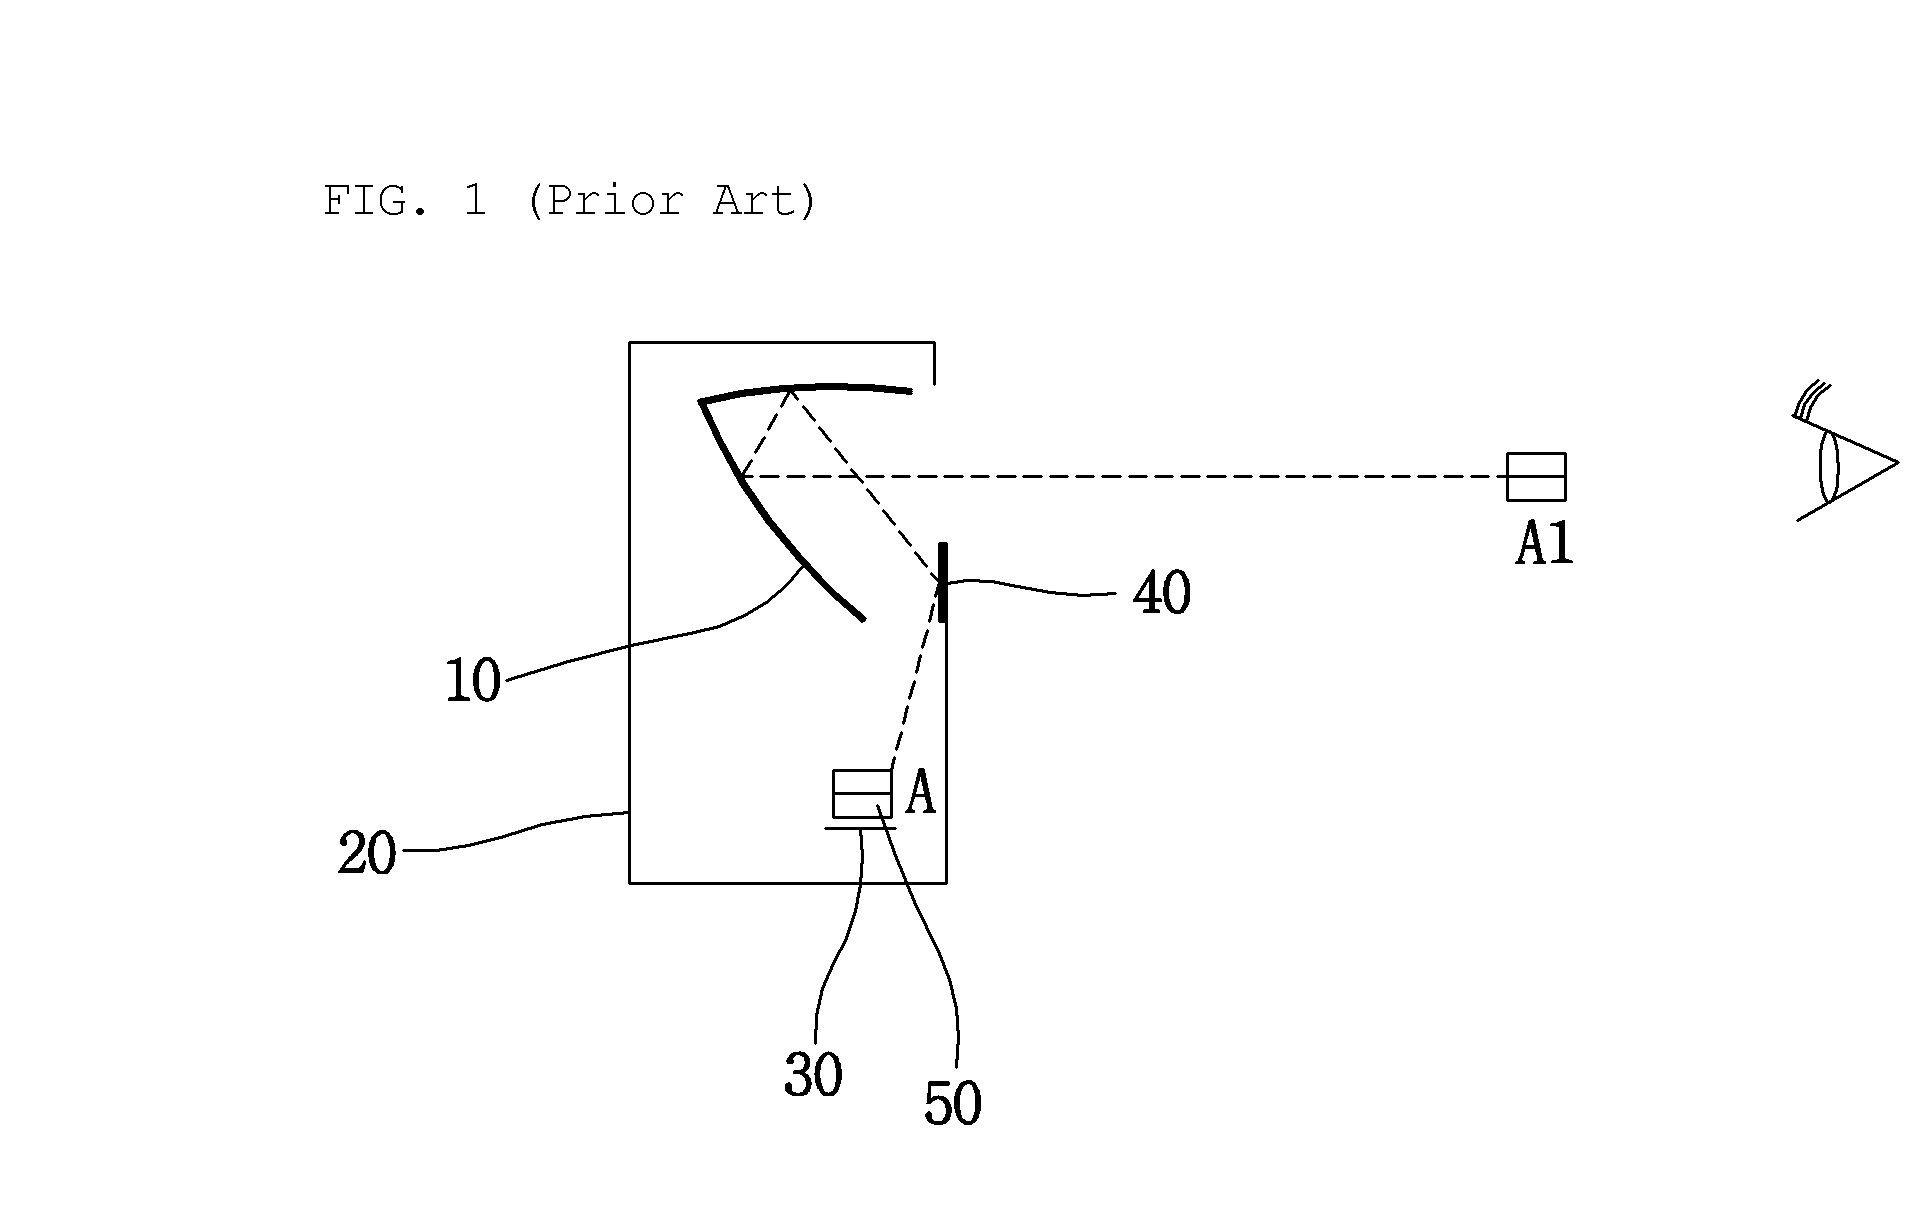 Multiview and multiangle image reconstruction device